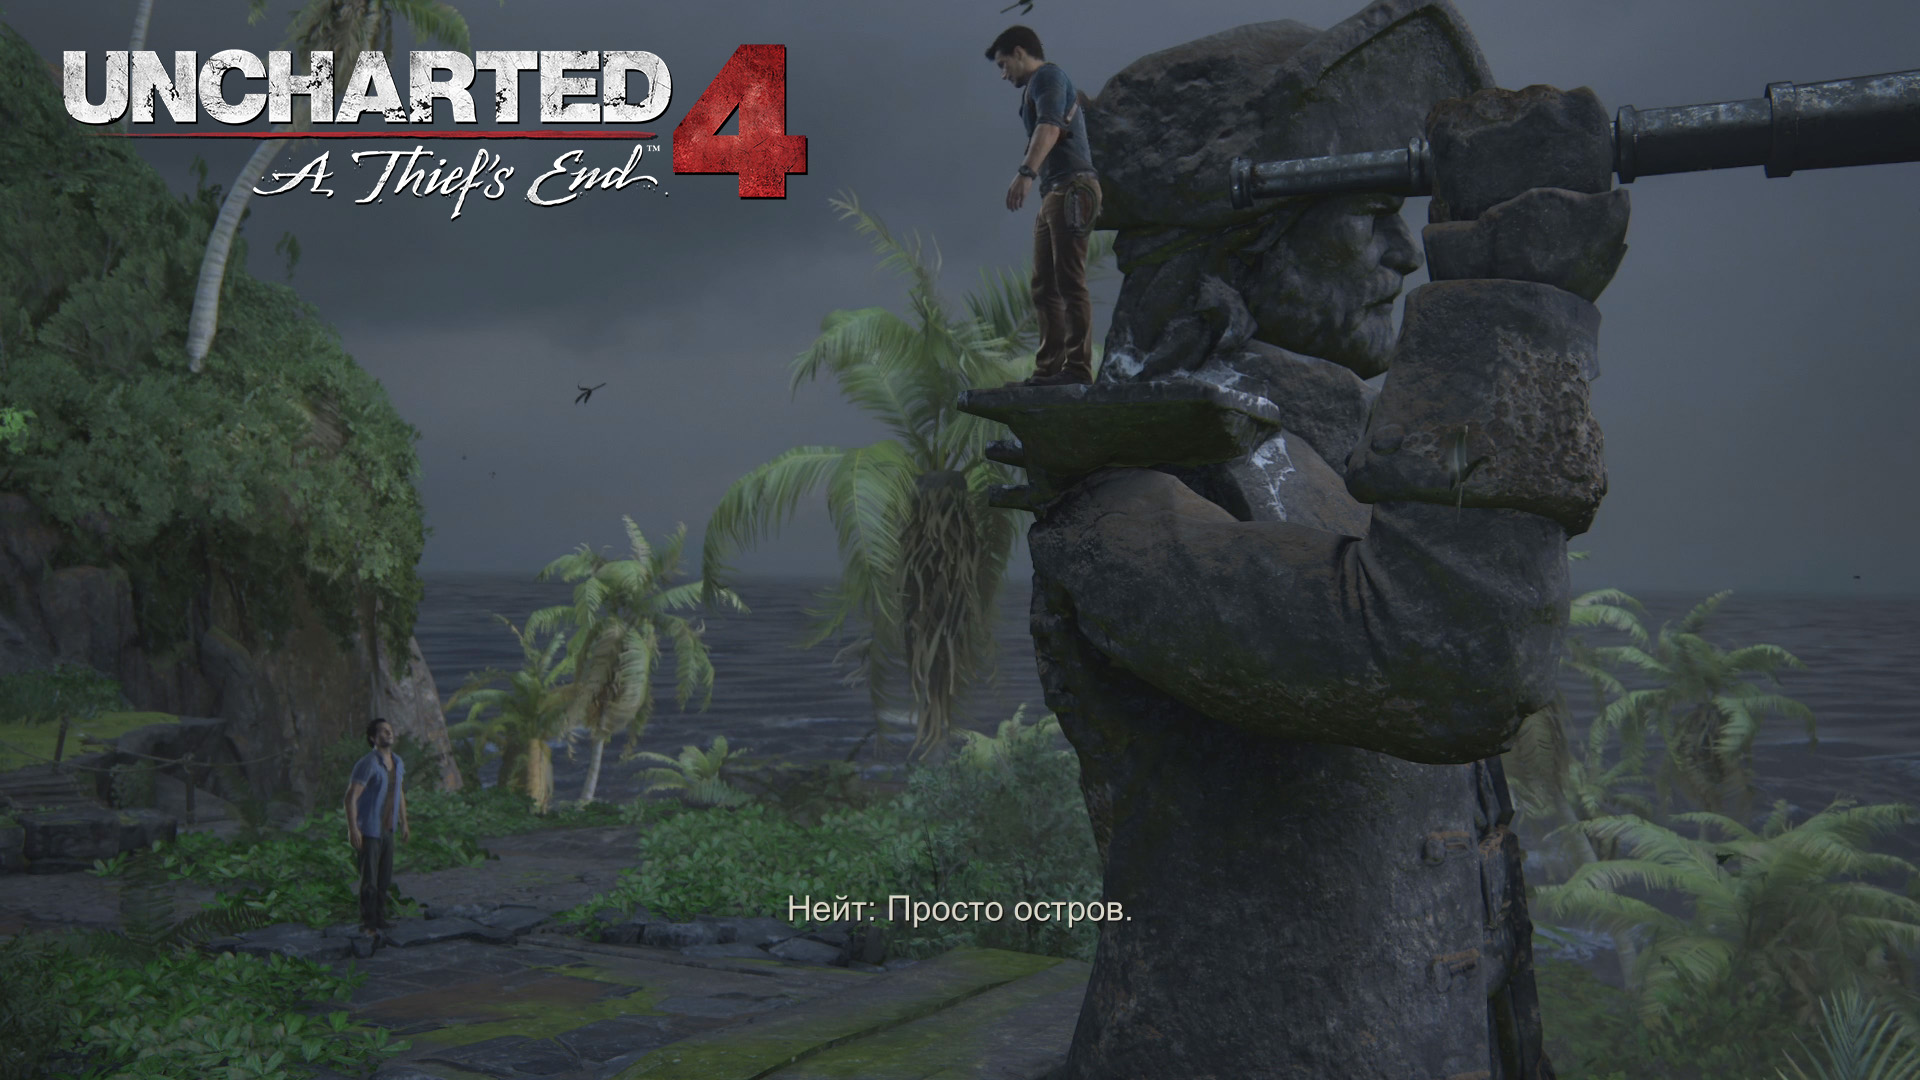 Uncharted 4: A Thief’s End ➪ # 16) Статуя